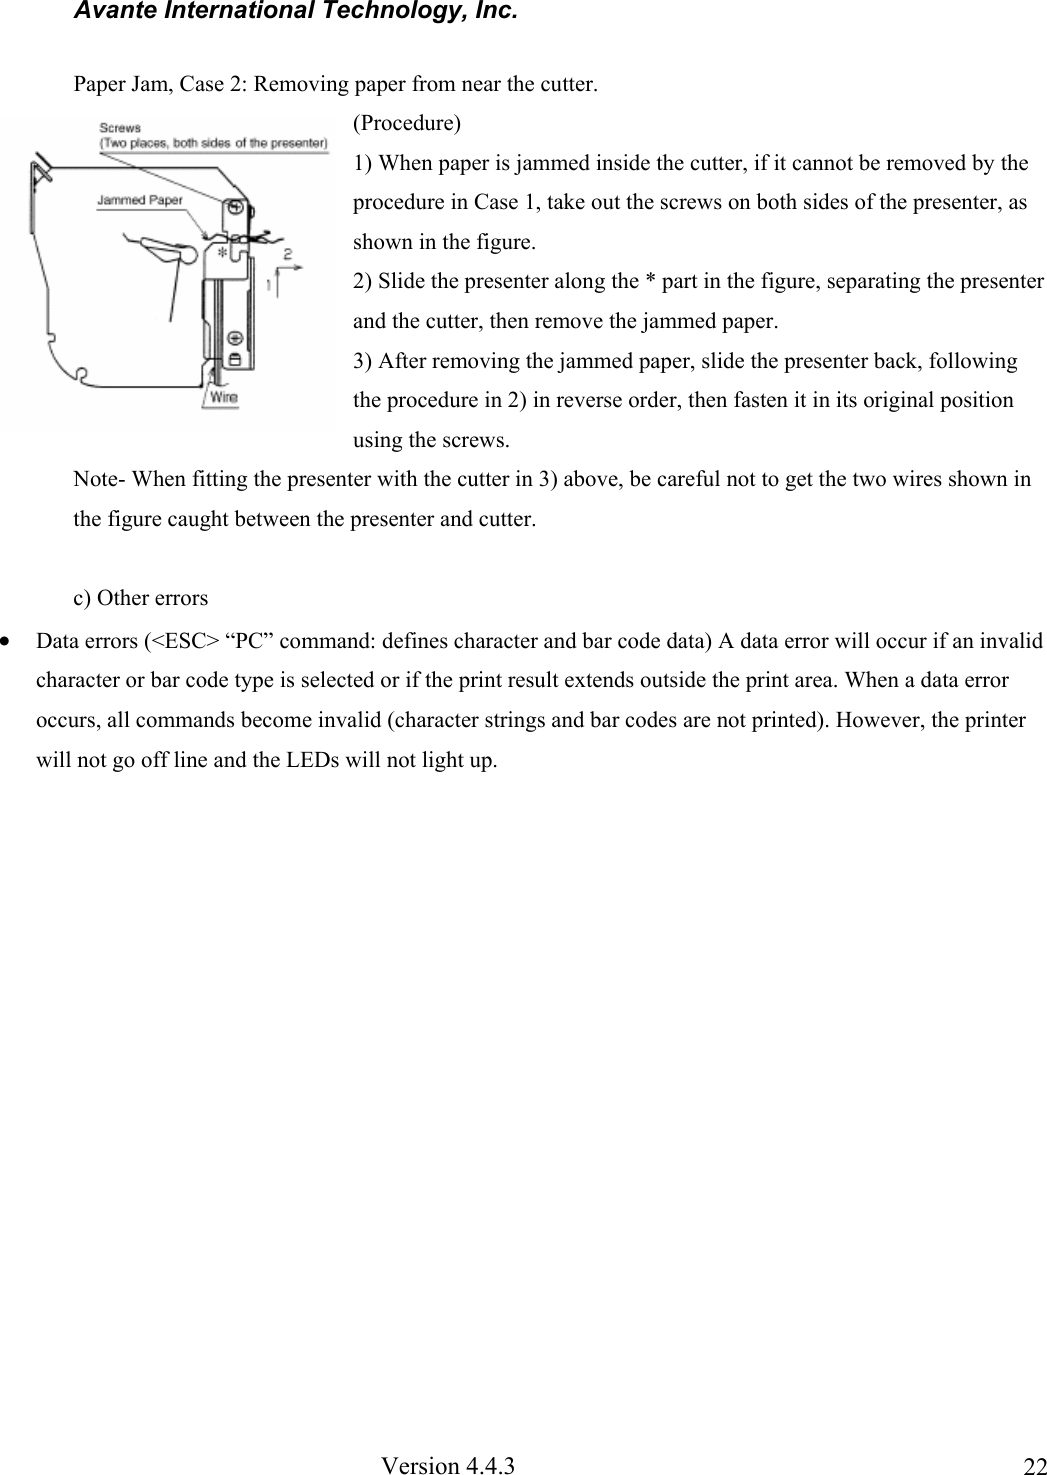 Avante International Technology, Inc.  Version 4.4.3  22Paper Jam, Case 2: Removing paper from near the cutter. (Procedure) 1) When paper is jammed inside the cutter, if it cannot be removed by the procedure in Case 1, take out the screws on both sides of the presenter, as shown in the figure. 2) Slide the presenter along the * part in the figure, separating the presenter and the cutter, then remove the jammed paper. 3) After removing the jammed paper, slide the presenter back, following the procedure in 2) in reverse order, then fasten it in its original position using the screws. Note- When fitting the presenter with the cutter in 3) above, be careful not to get the two wires shown in the figure caught between the presenter and cutter.  c) Other errors • Data errors (&lt;ESC&gt; “PC” command: defines character and bar code data) A data error will occur if an invalid character or bar code type is selected or if the print result extends outside the print area. When a data error occurs, all commands become invalid (character strings and bar codes are not printed). However, the printer will not go off line and the LEDs will not light up.   